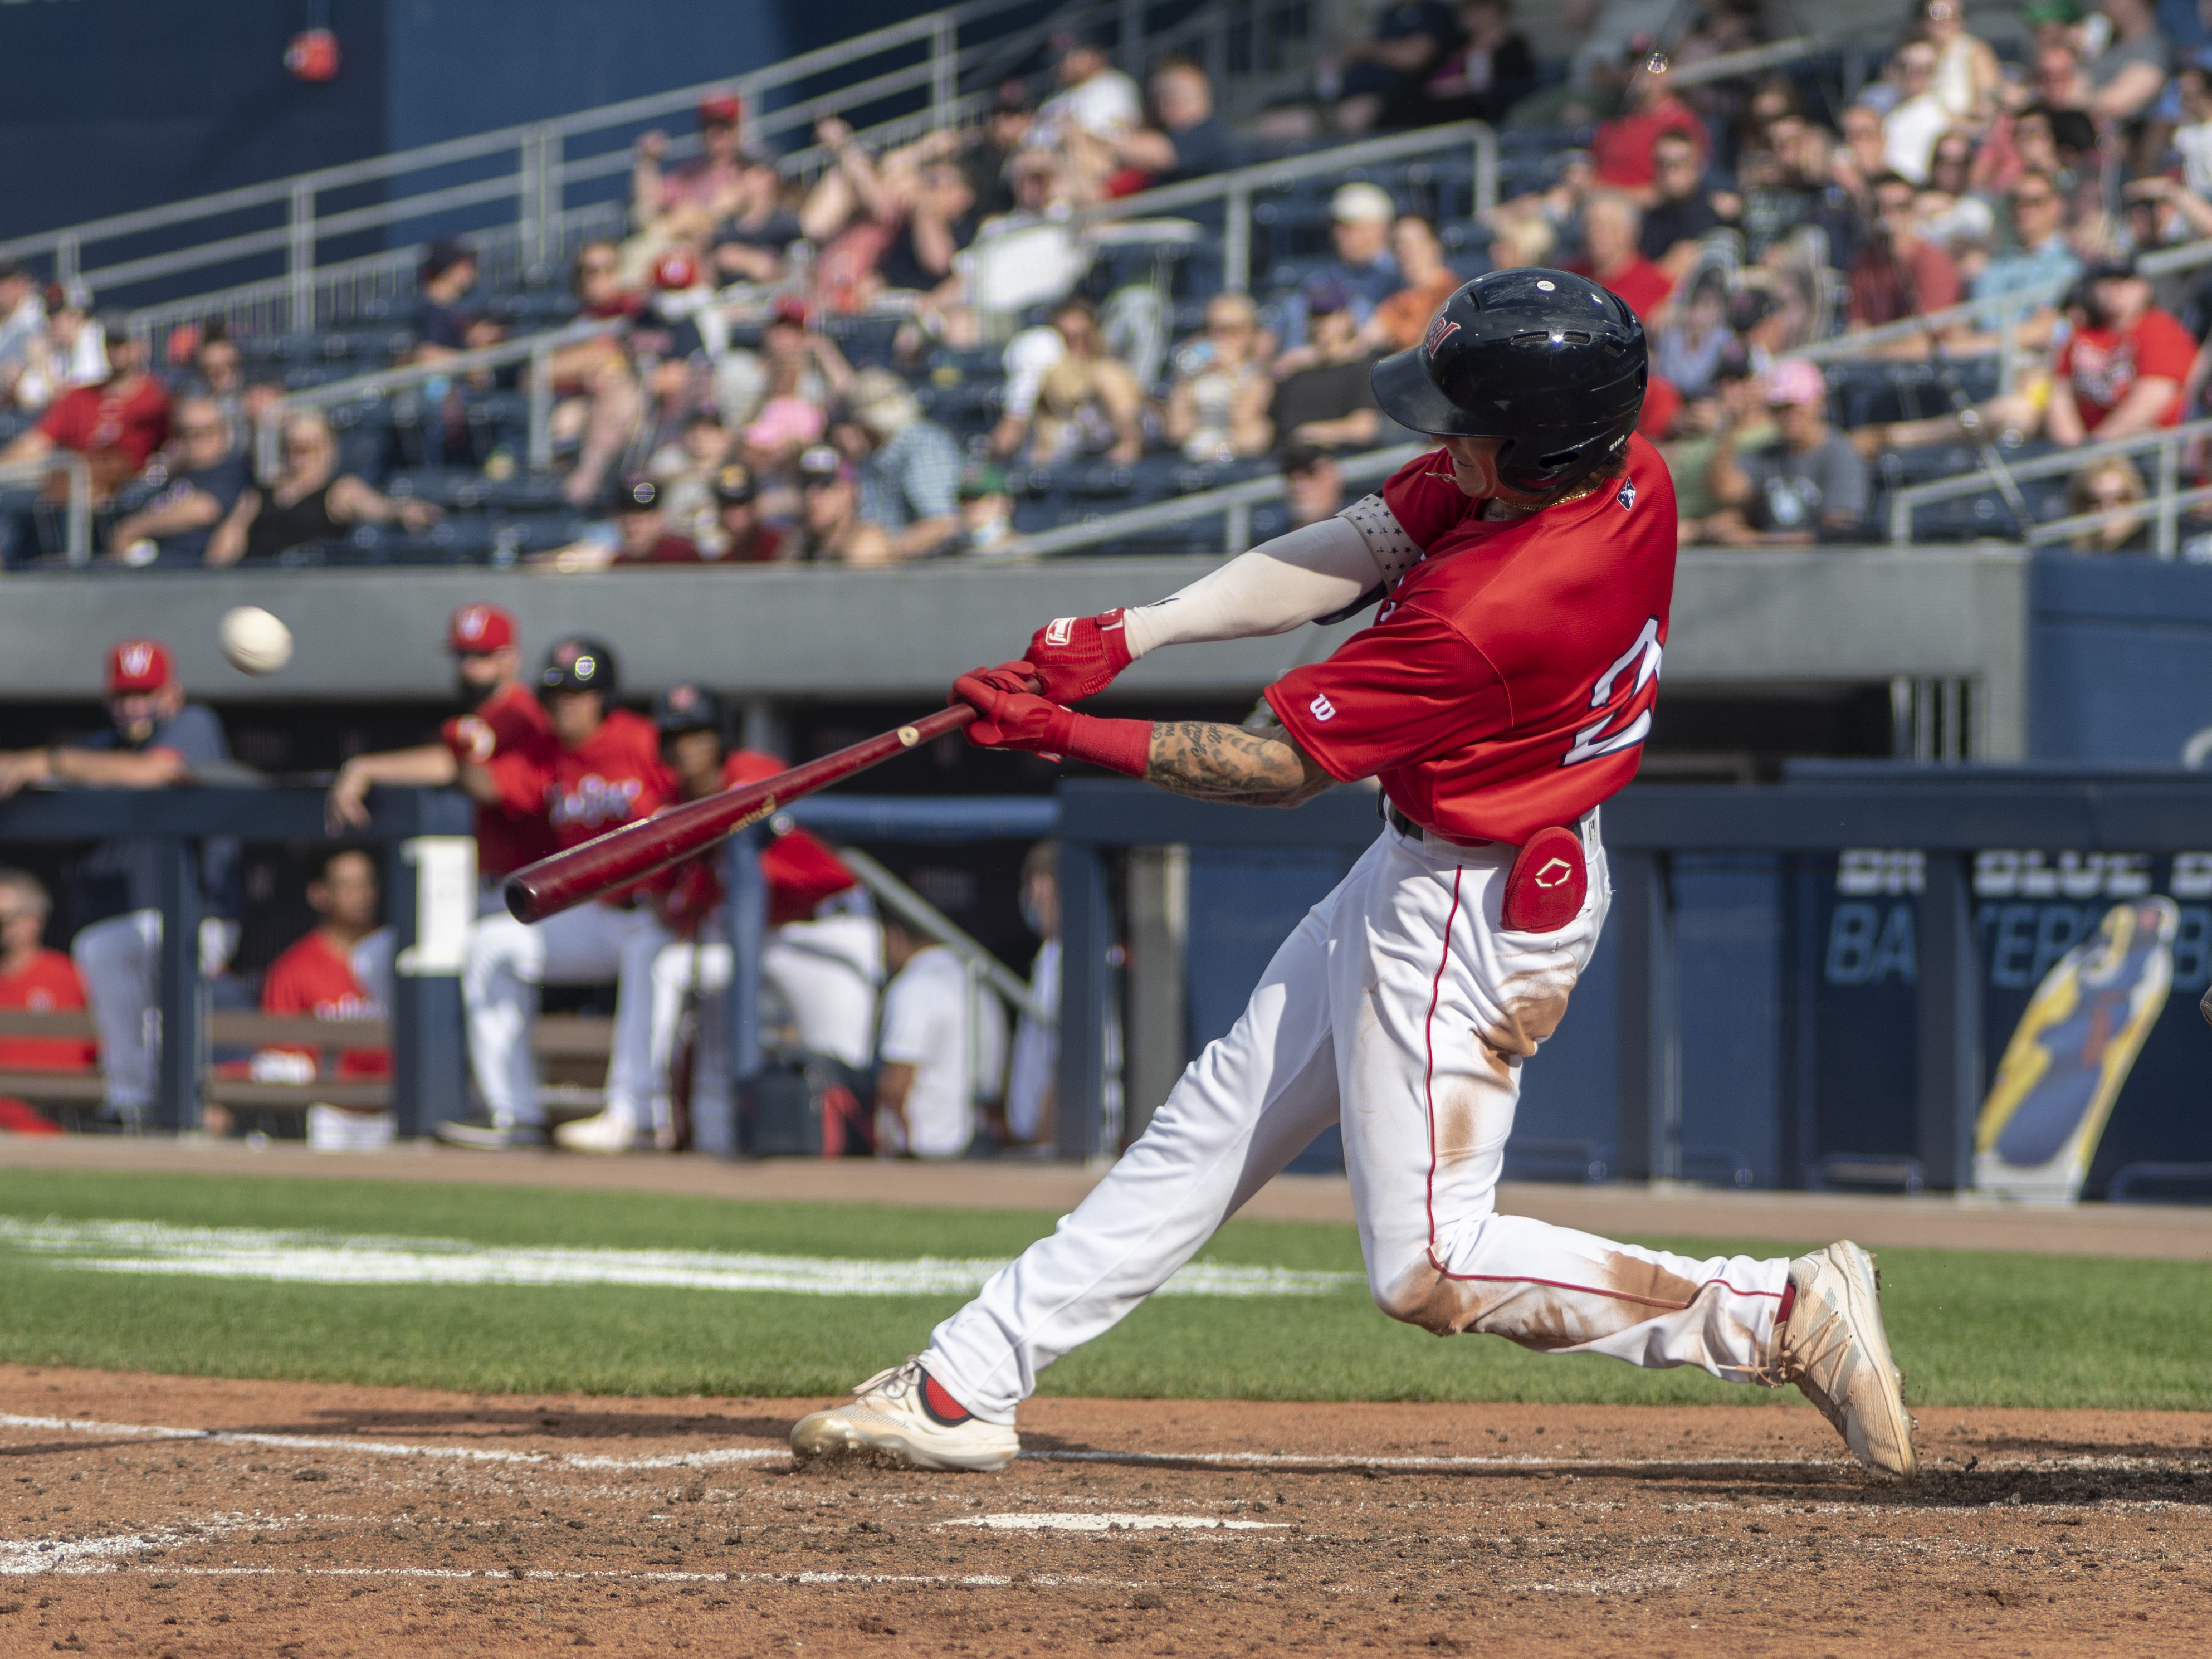 Red Sox prospect Jarren Duran's speed rockets him to the big stage